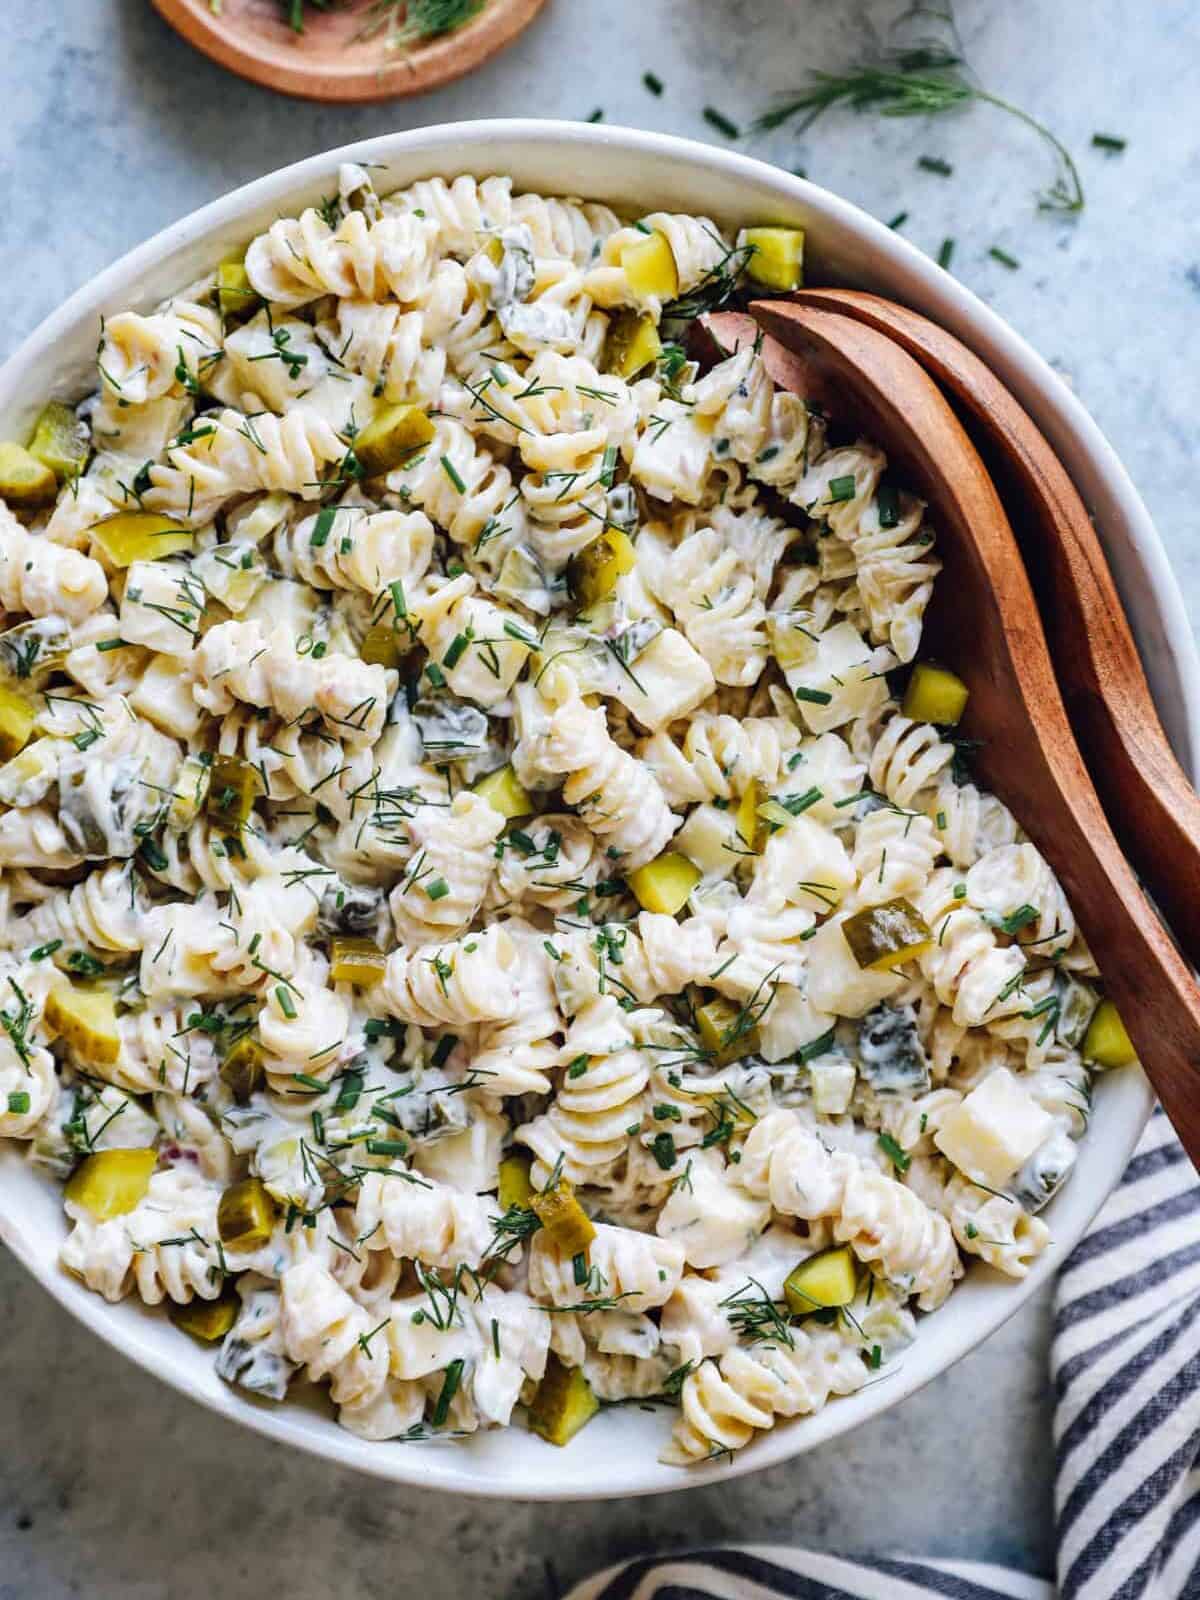 overhead view of dill pickle pasta salad in a white serving bowl with wooden salad tongs.